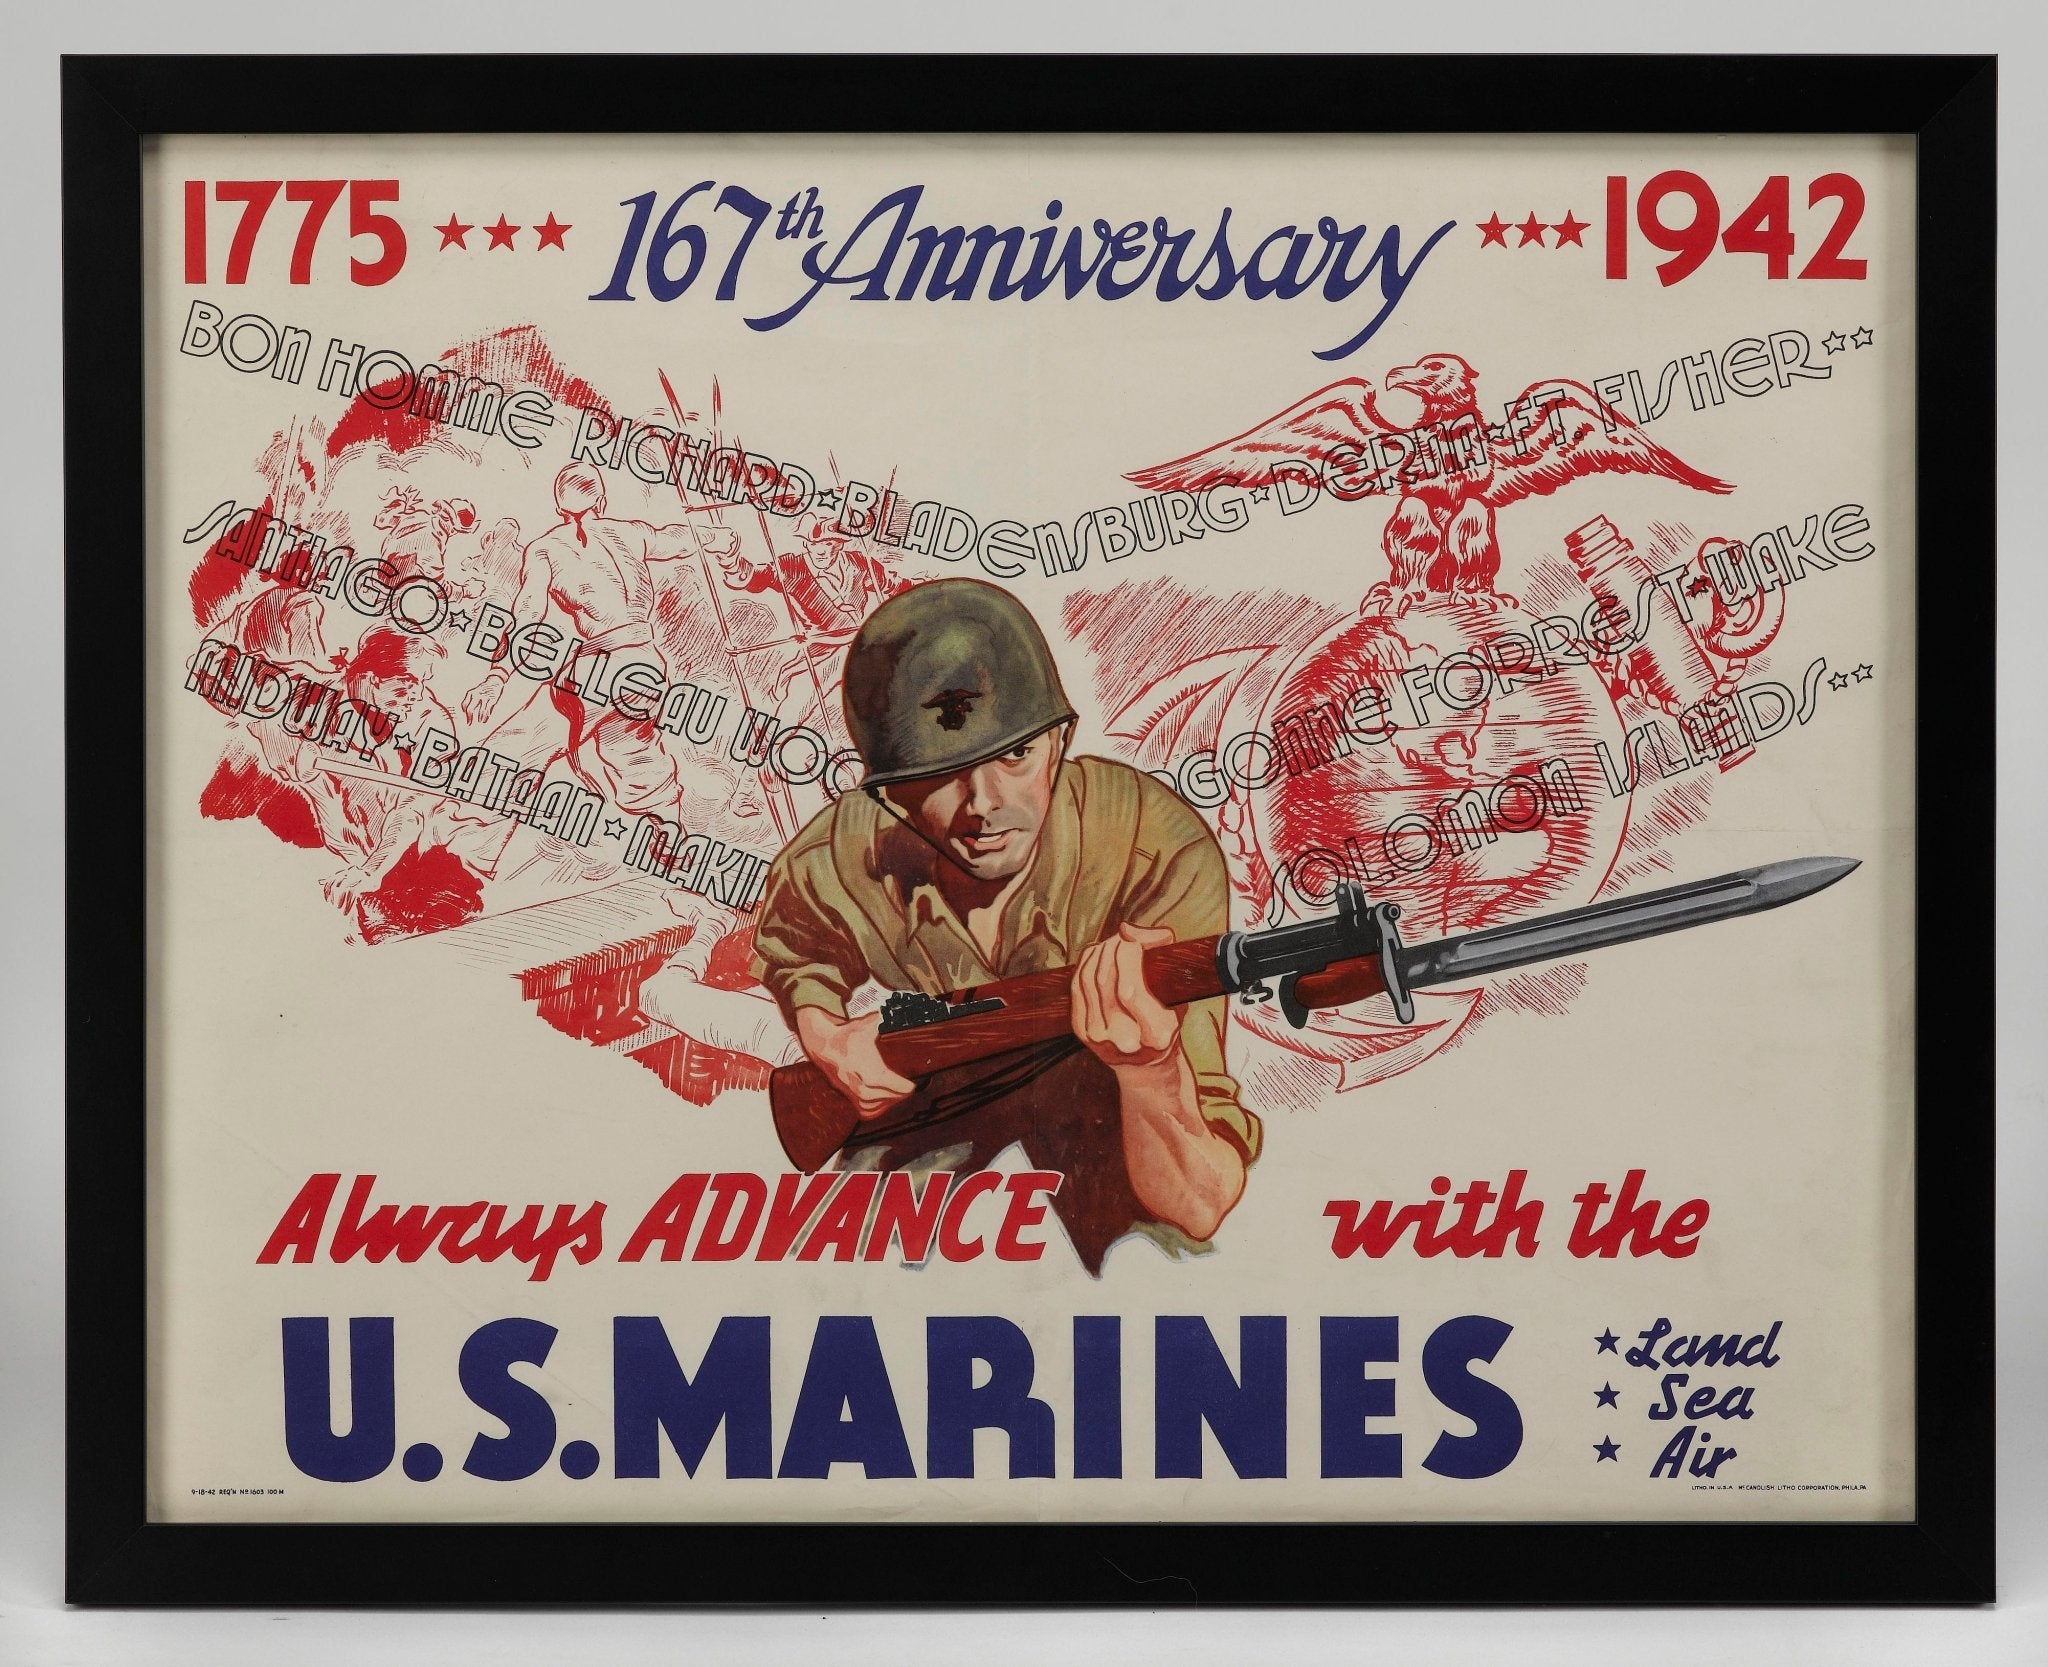 "1775 - 167th Anniversary - 1942. Always Advance with the U.S. Marines" Vintage WWII Marines Recruitment Poster - The Great Republic